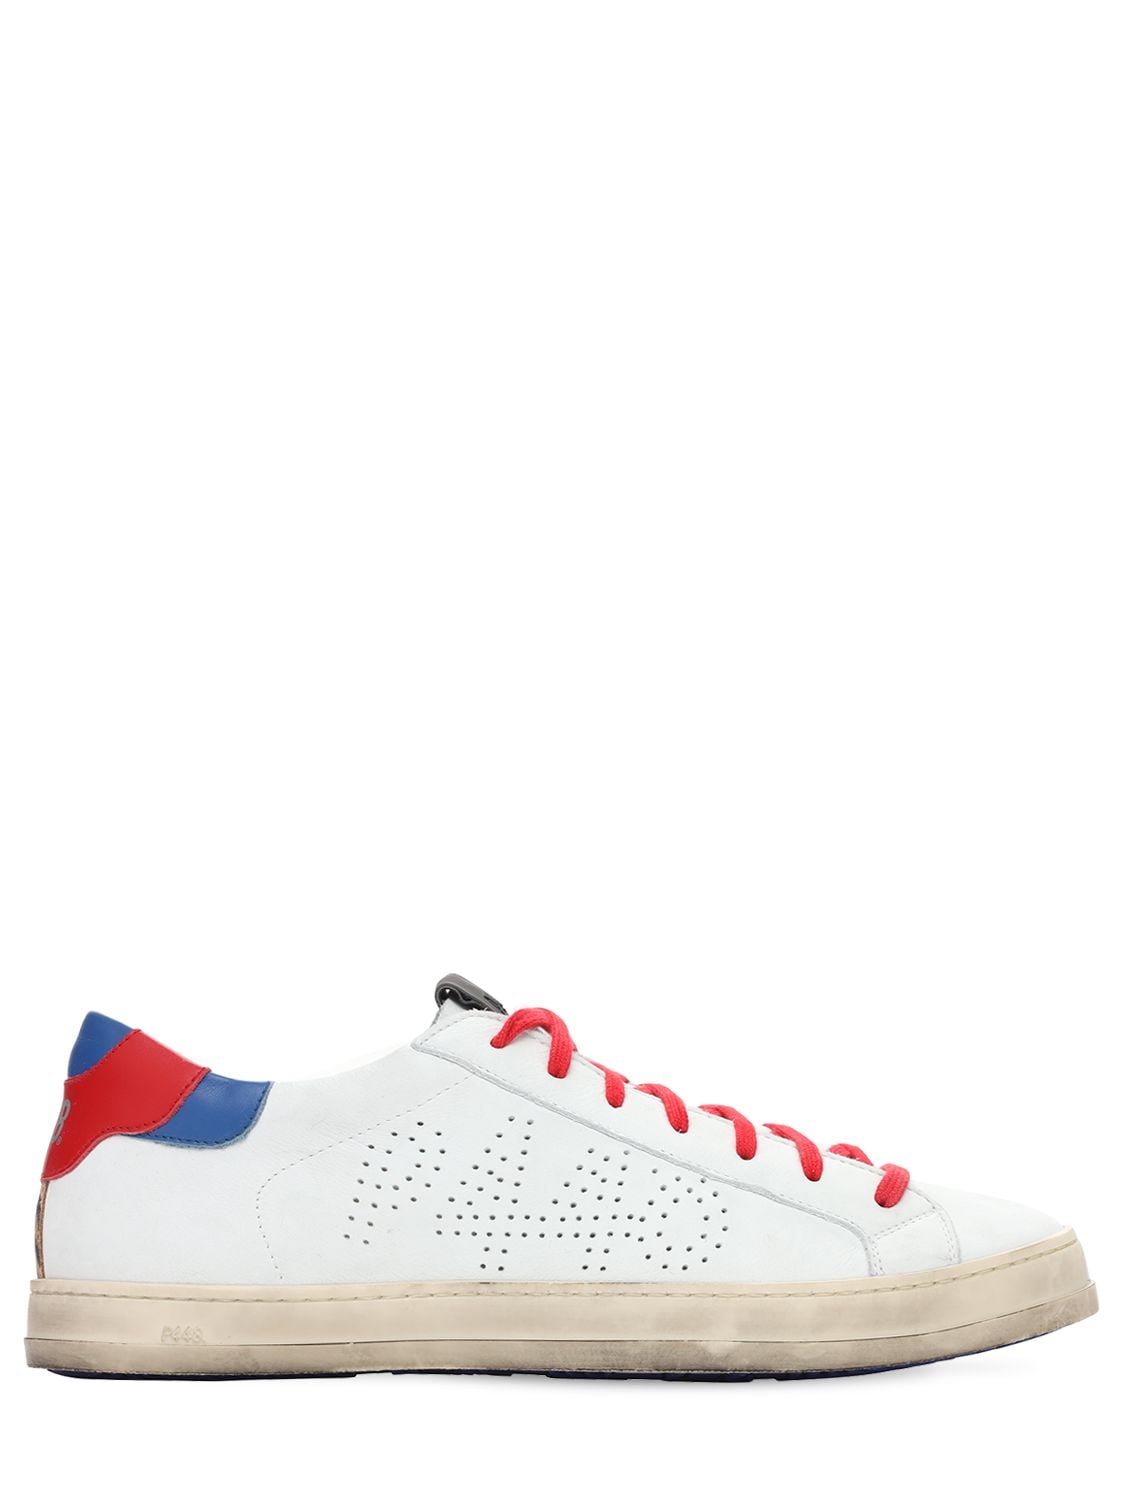 P448 John Leather & Suede Low-top Sneakers In Red,white,blue